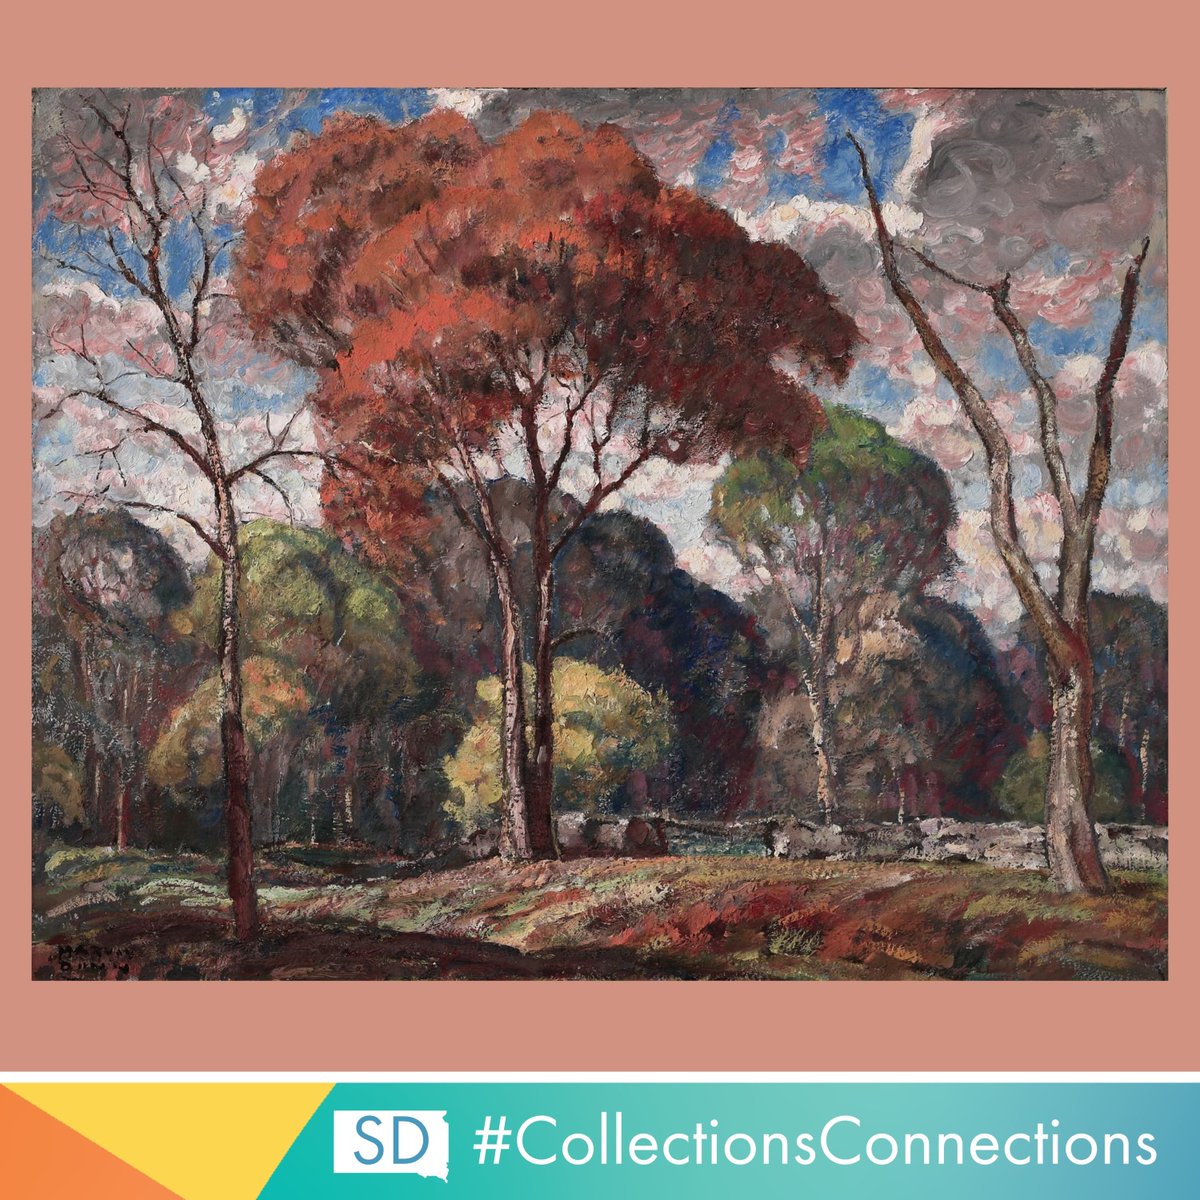 Happy Arbor Day! 🌳 Illustrator and educator Harvey Dunn created many landscapes during his career. Here we see his work featuring trees!

#CollectionsConnections #stateofcreate #HarveyDunn